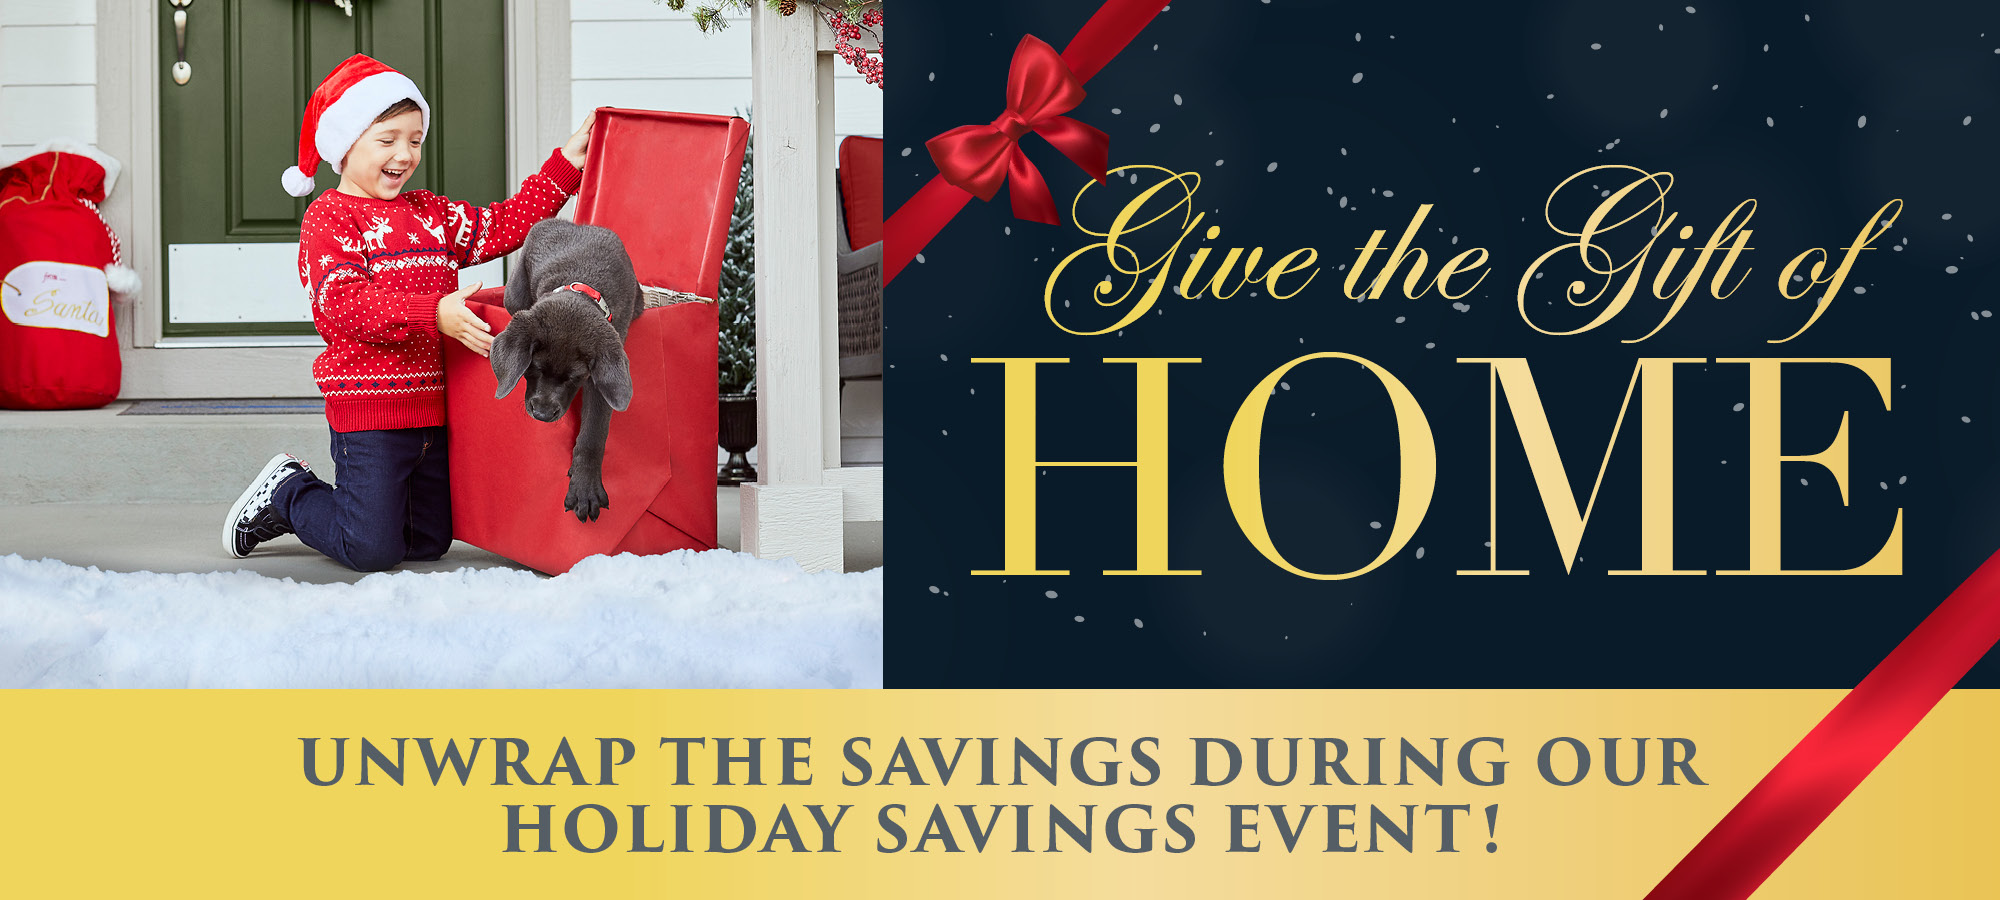 Give the Gift of Home in San Antonio